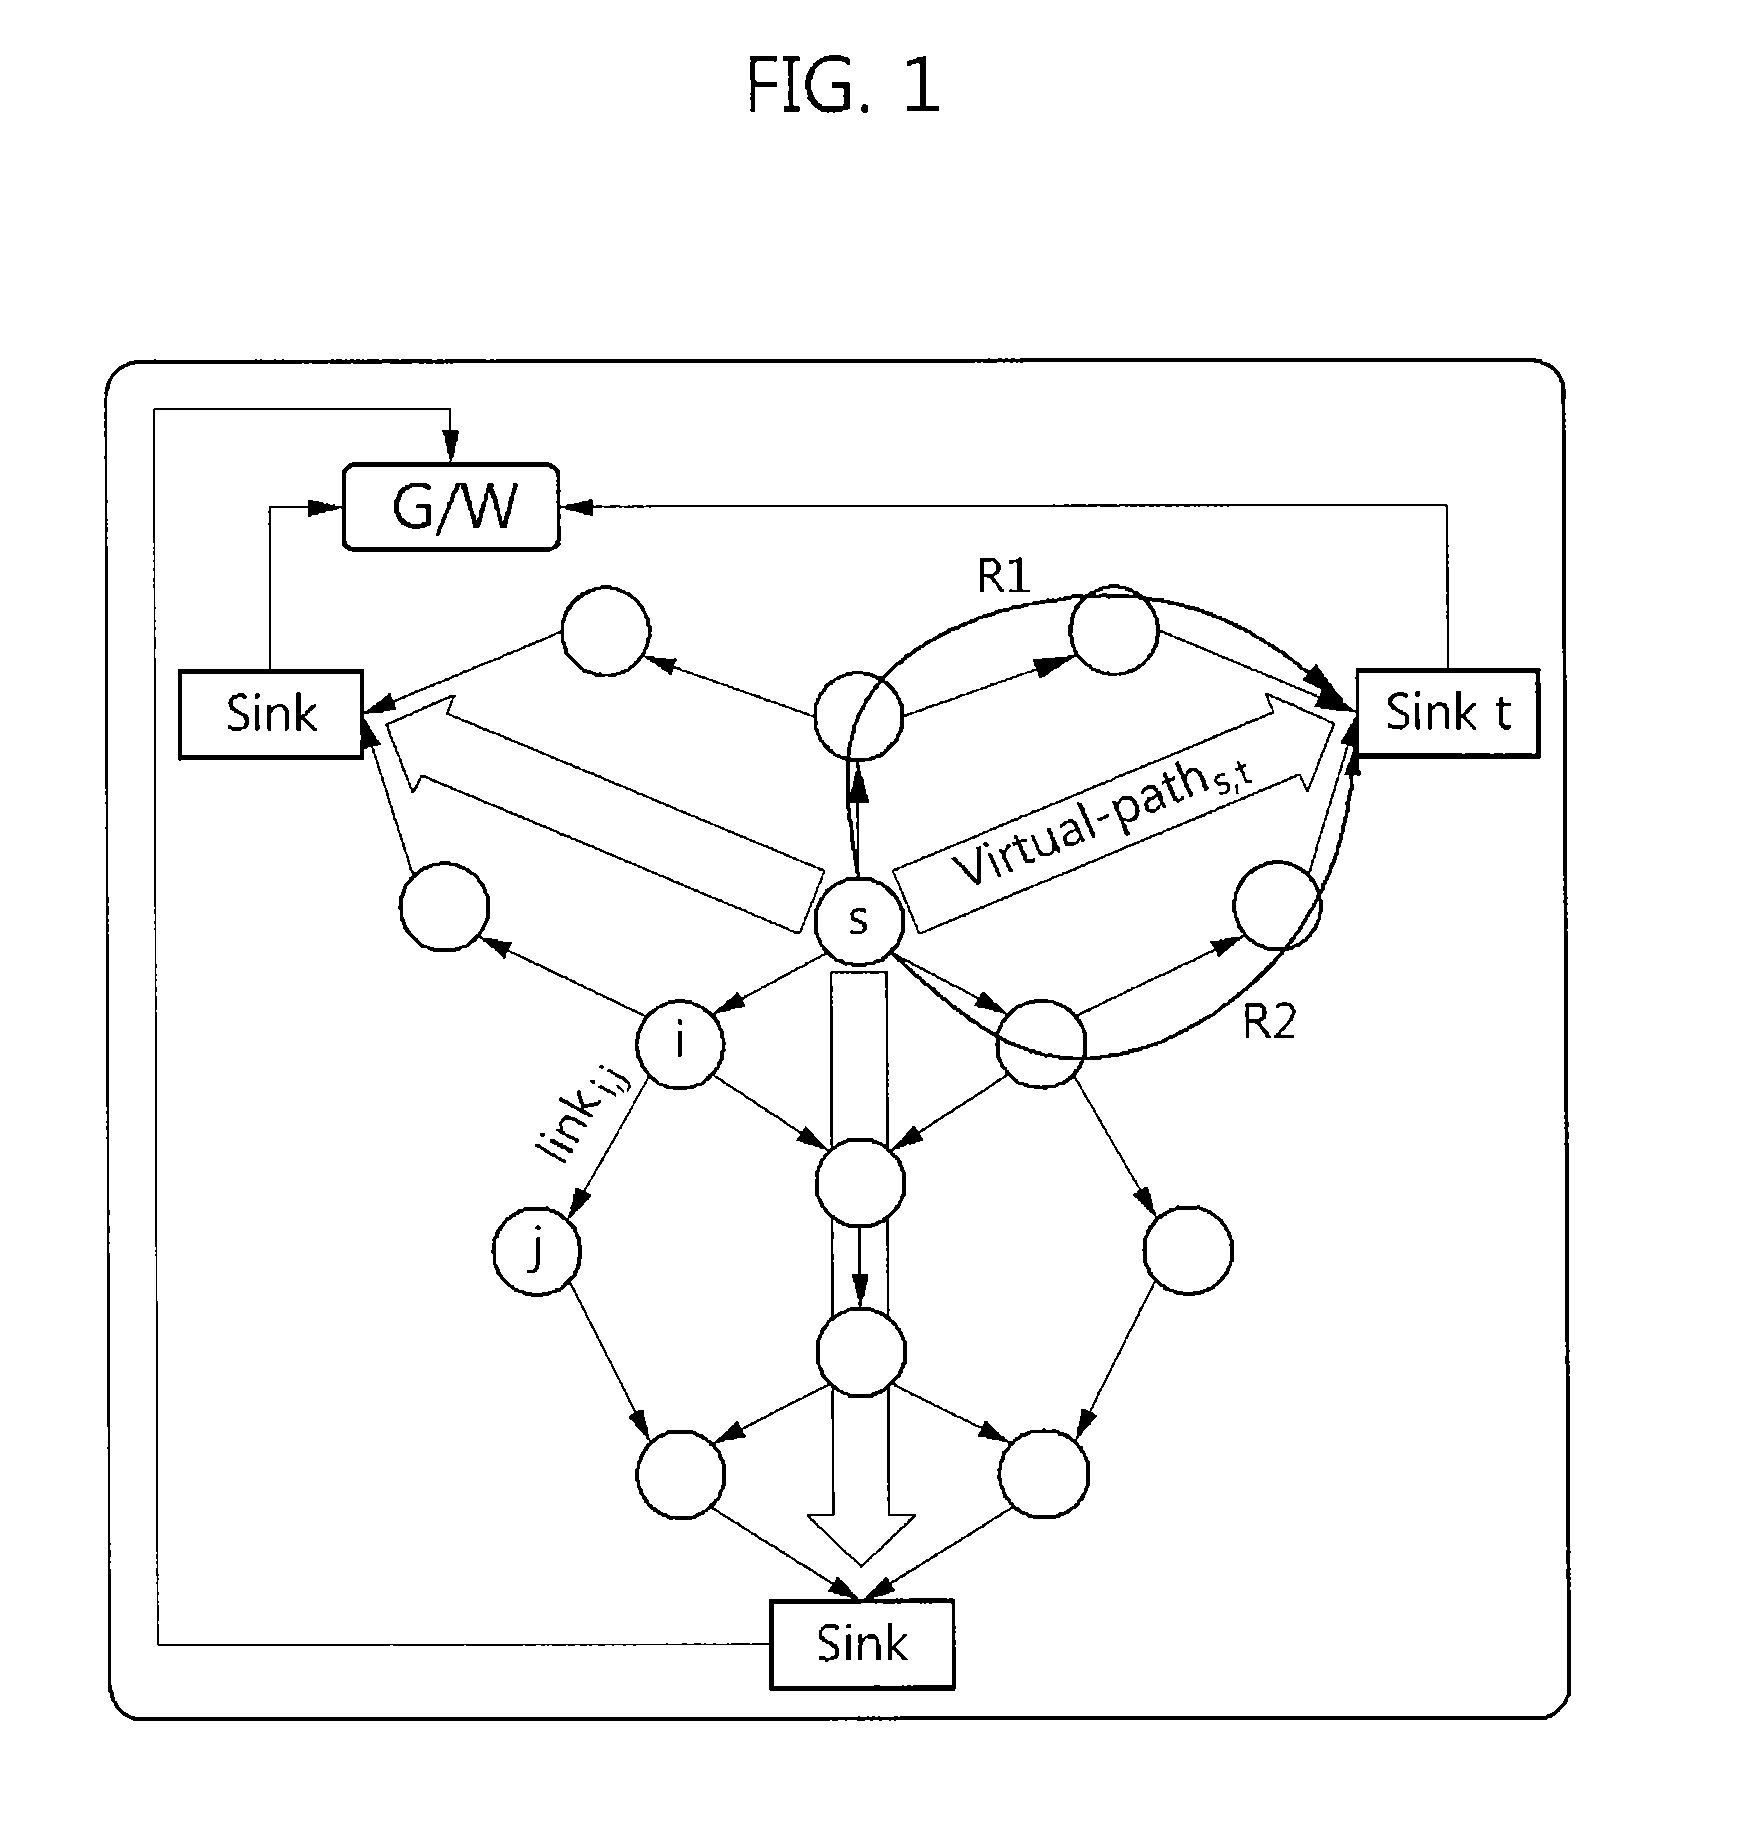 Method for controlling multi-sink/multi-path routing sensor network and sensor network using the same